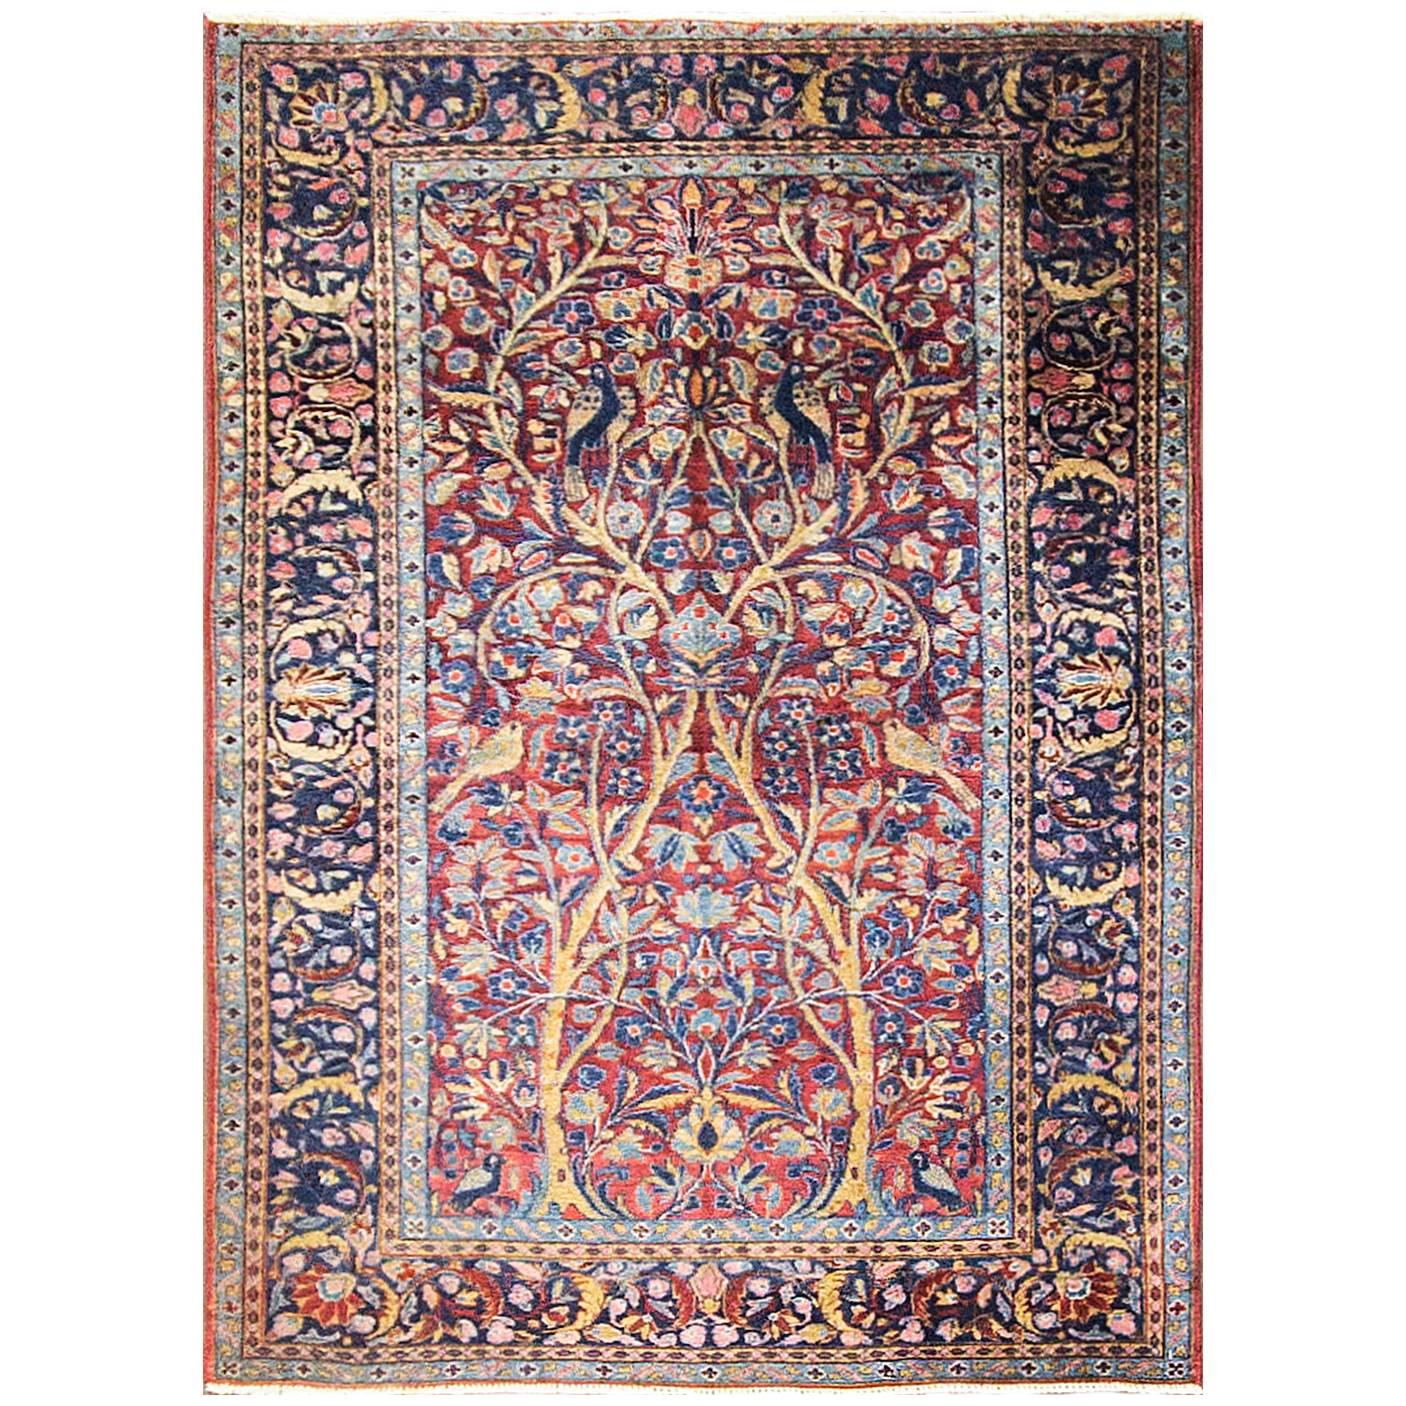 Antique Three of Life Manchester Kashan Rug, 3' x 4'10" 